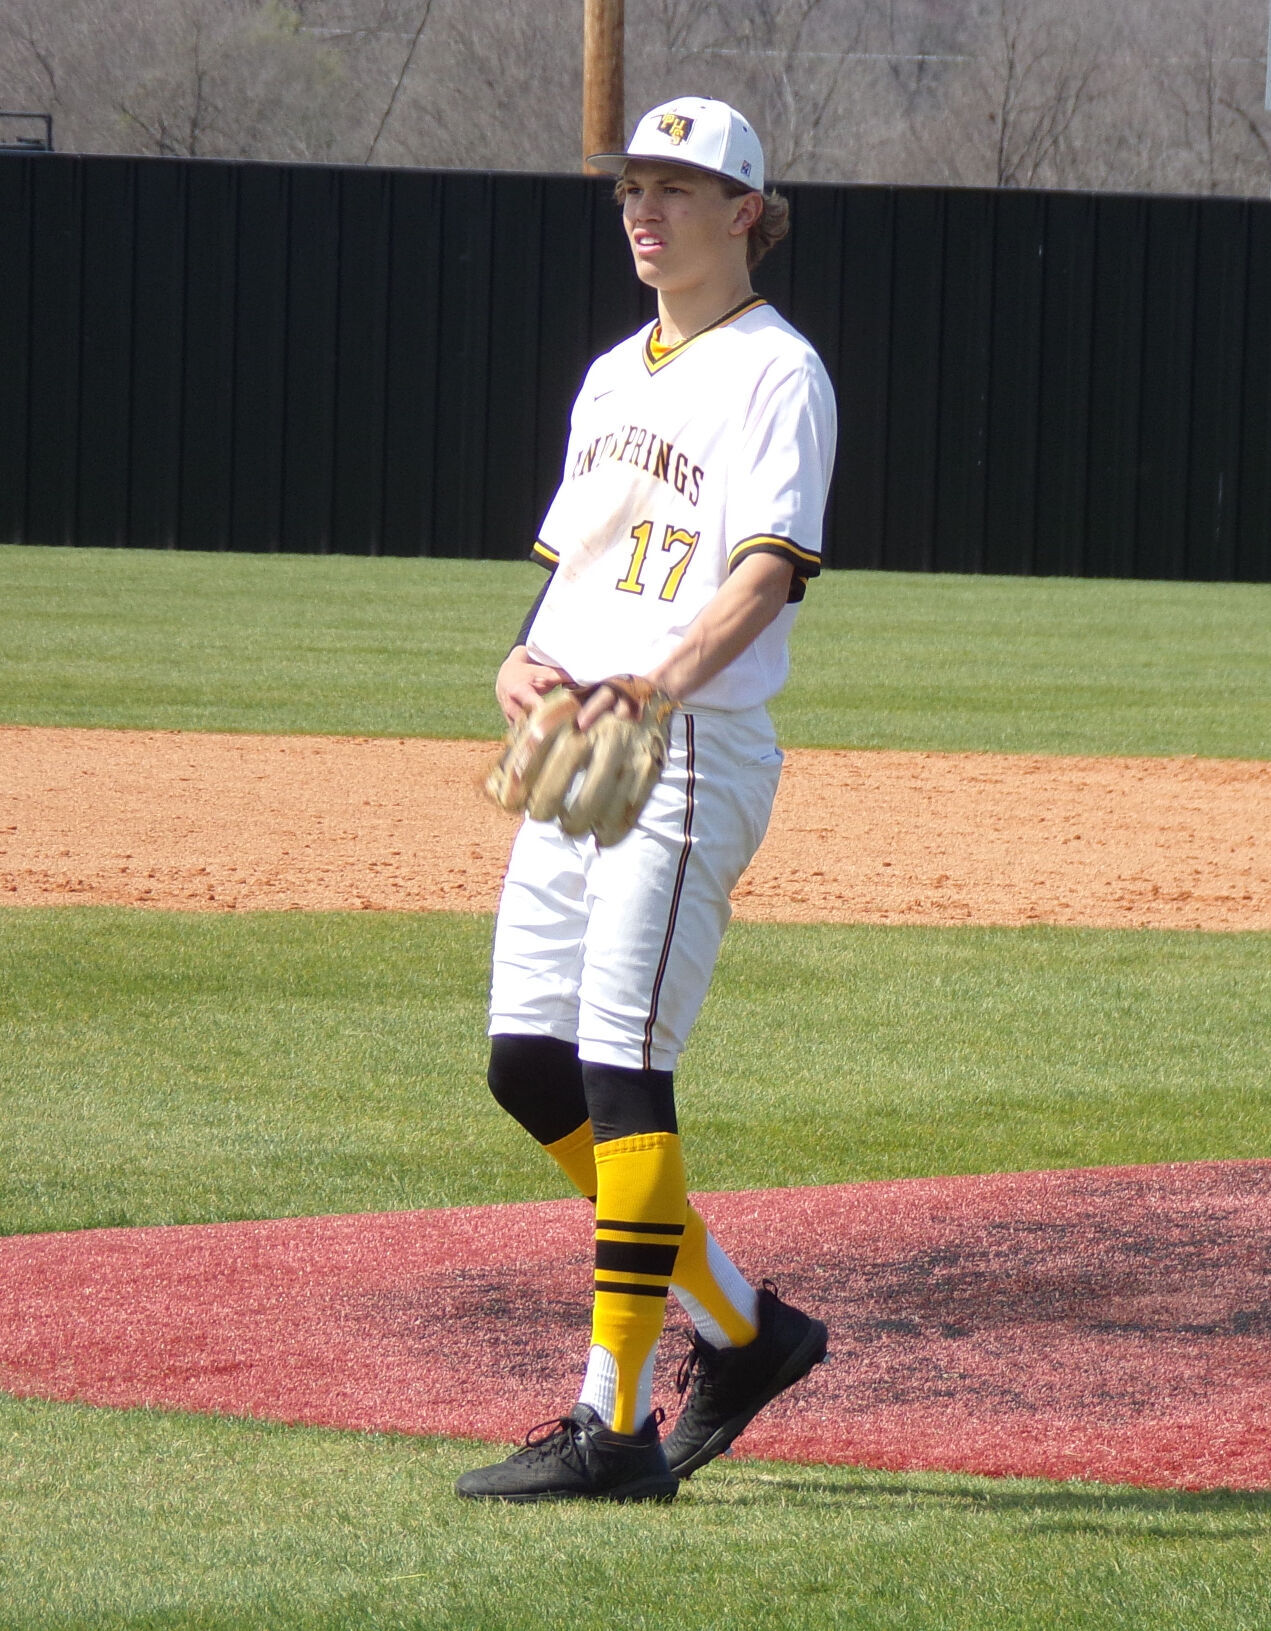 Sand Springs Baseball Wins 7-4 Over Union with Tavaglione’s Dual Home Runs